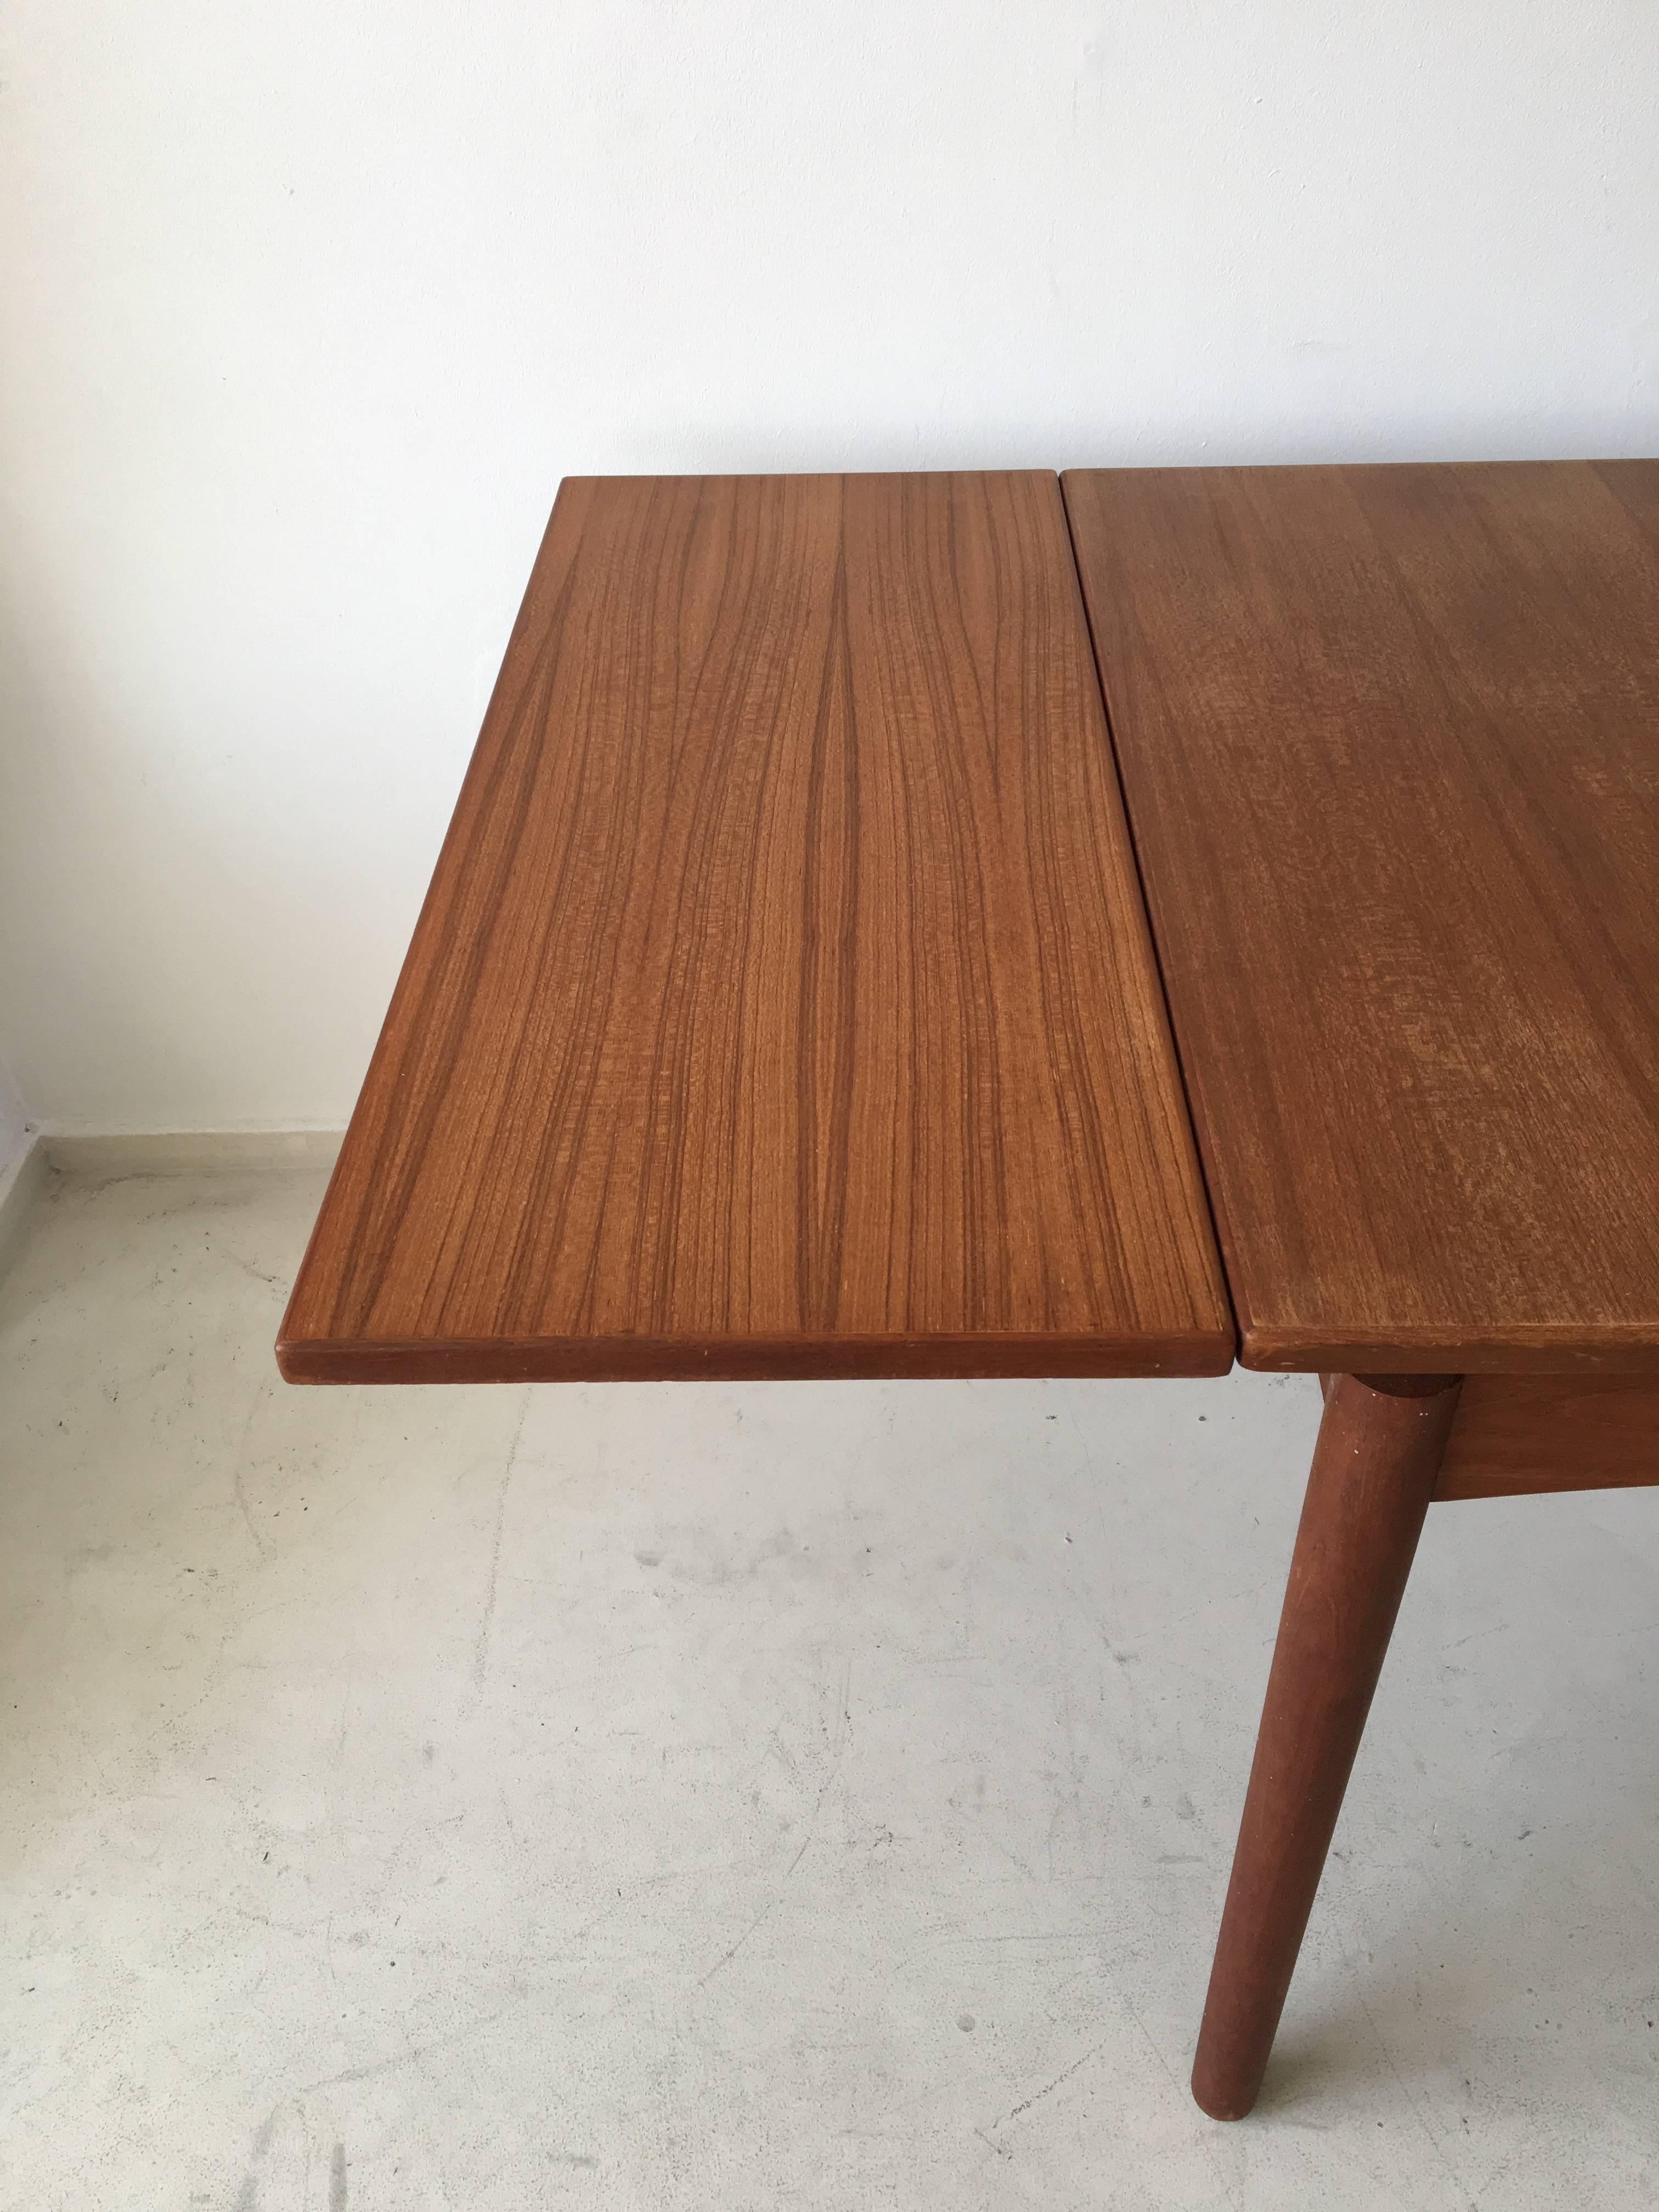 Mid-Century Modern Scandinavian Draw-Leaf Extendable Teak Dining Table, 1960s For Sale